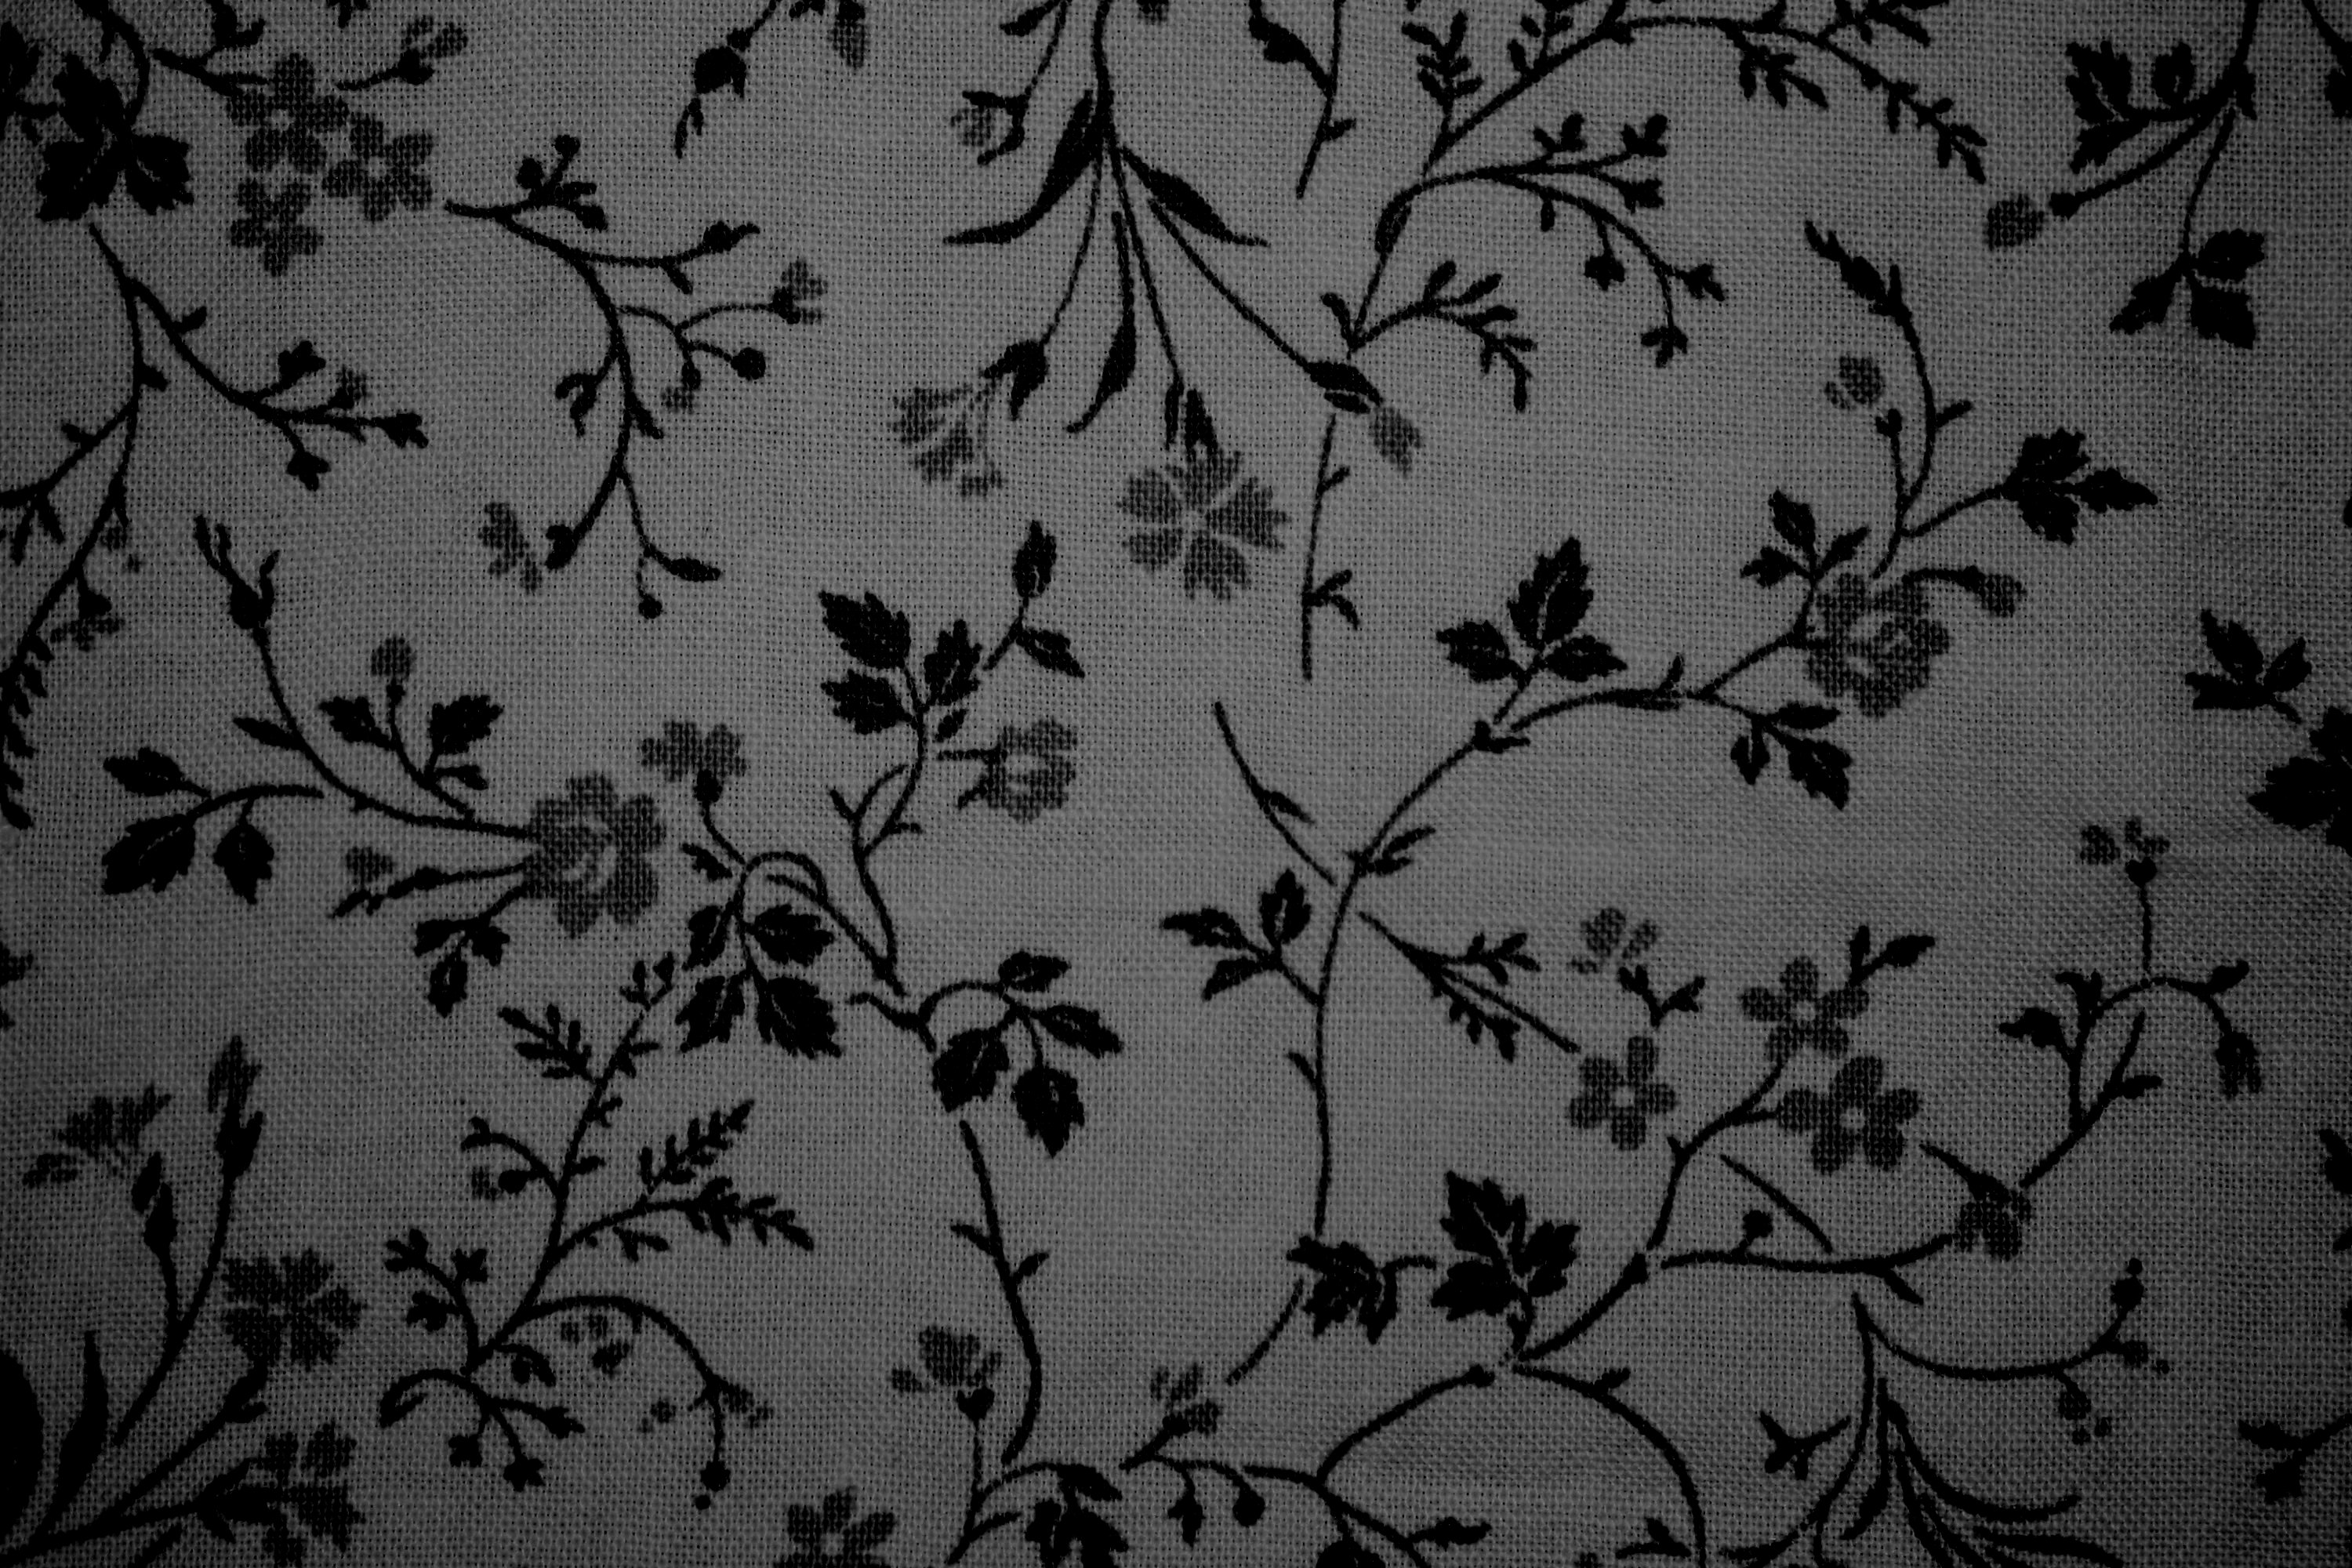 Black on Gray Floral Print Fabric Texture Picture, Free Photograph